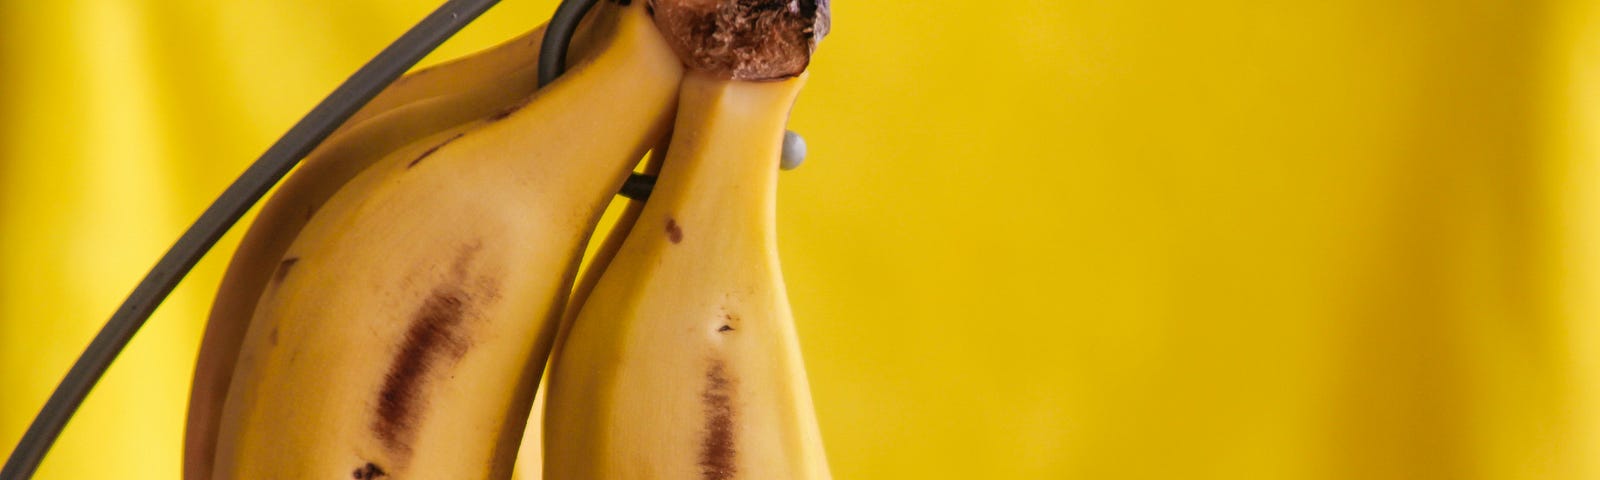 Three ripe bananas on a metal hook against a yellow background.